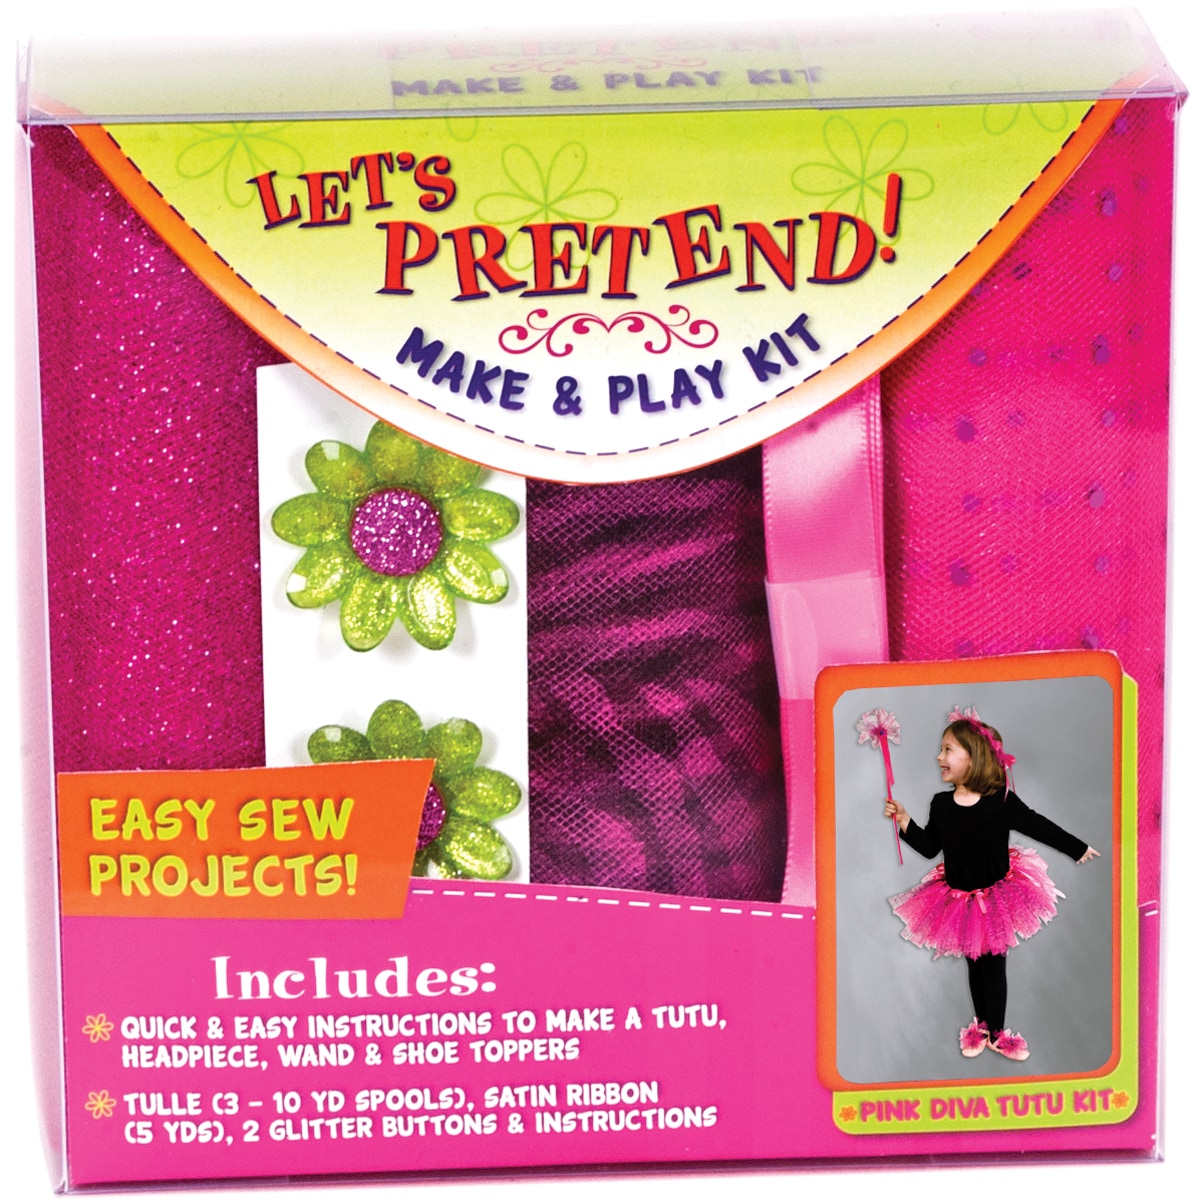 Lets Pretend Tutu Kit pink (Pink. WARNING Choking hazard small parts. Adult supervision required for children under 3 years. Imported. )